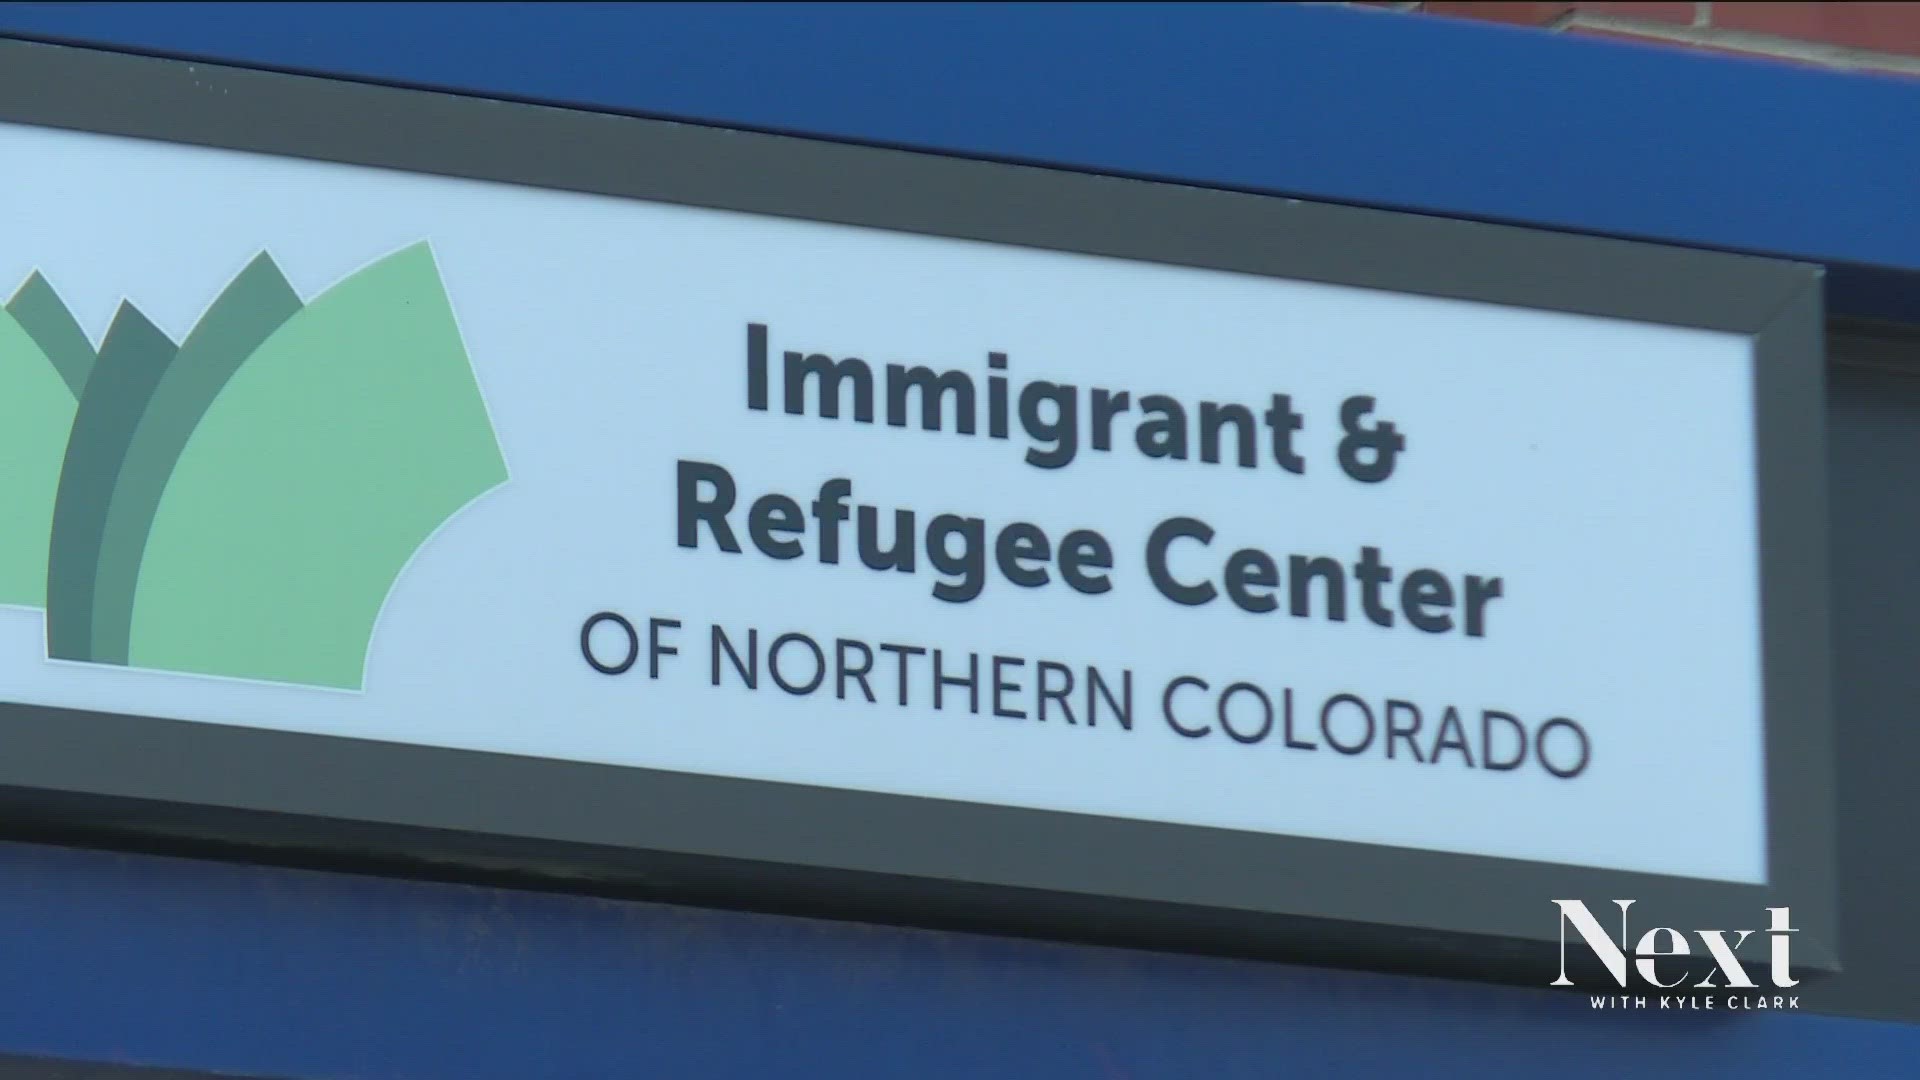 In Greeley, the Immigrant and Refugee Center of Northern Colorado wants to make sure everyone feels welcome.